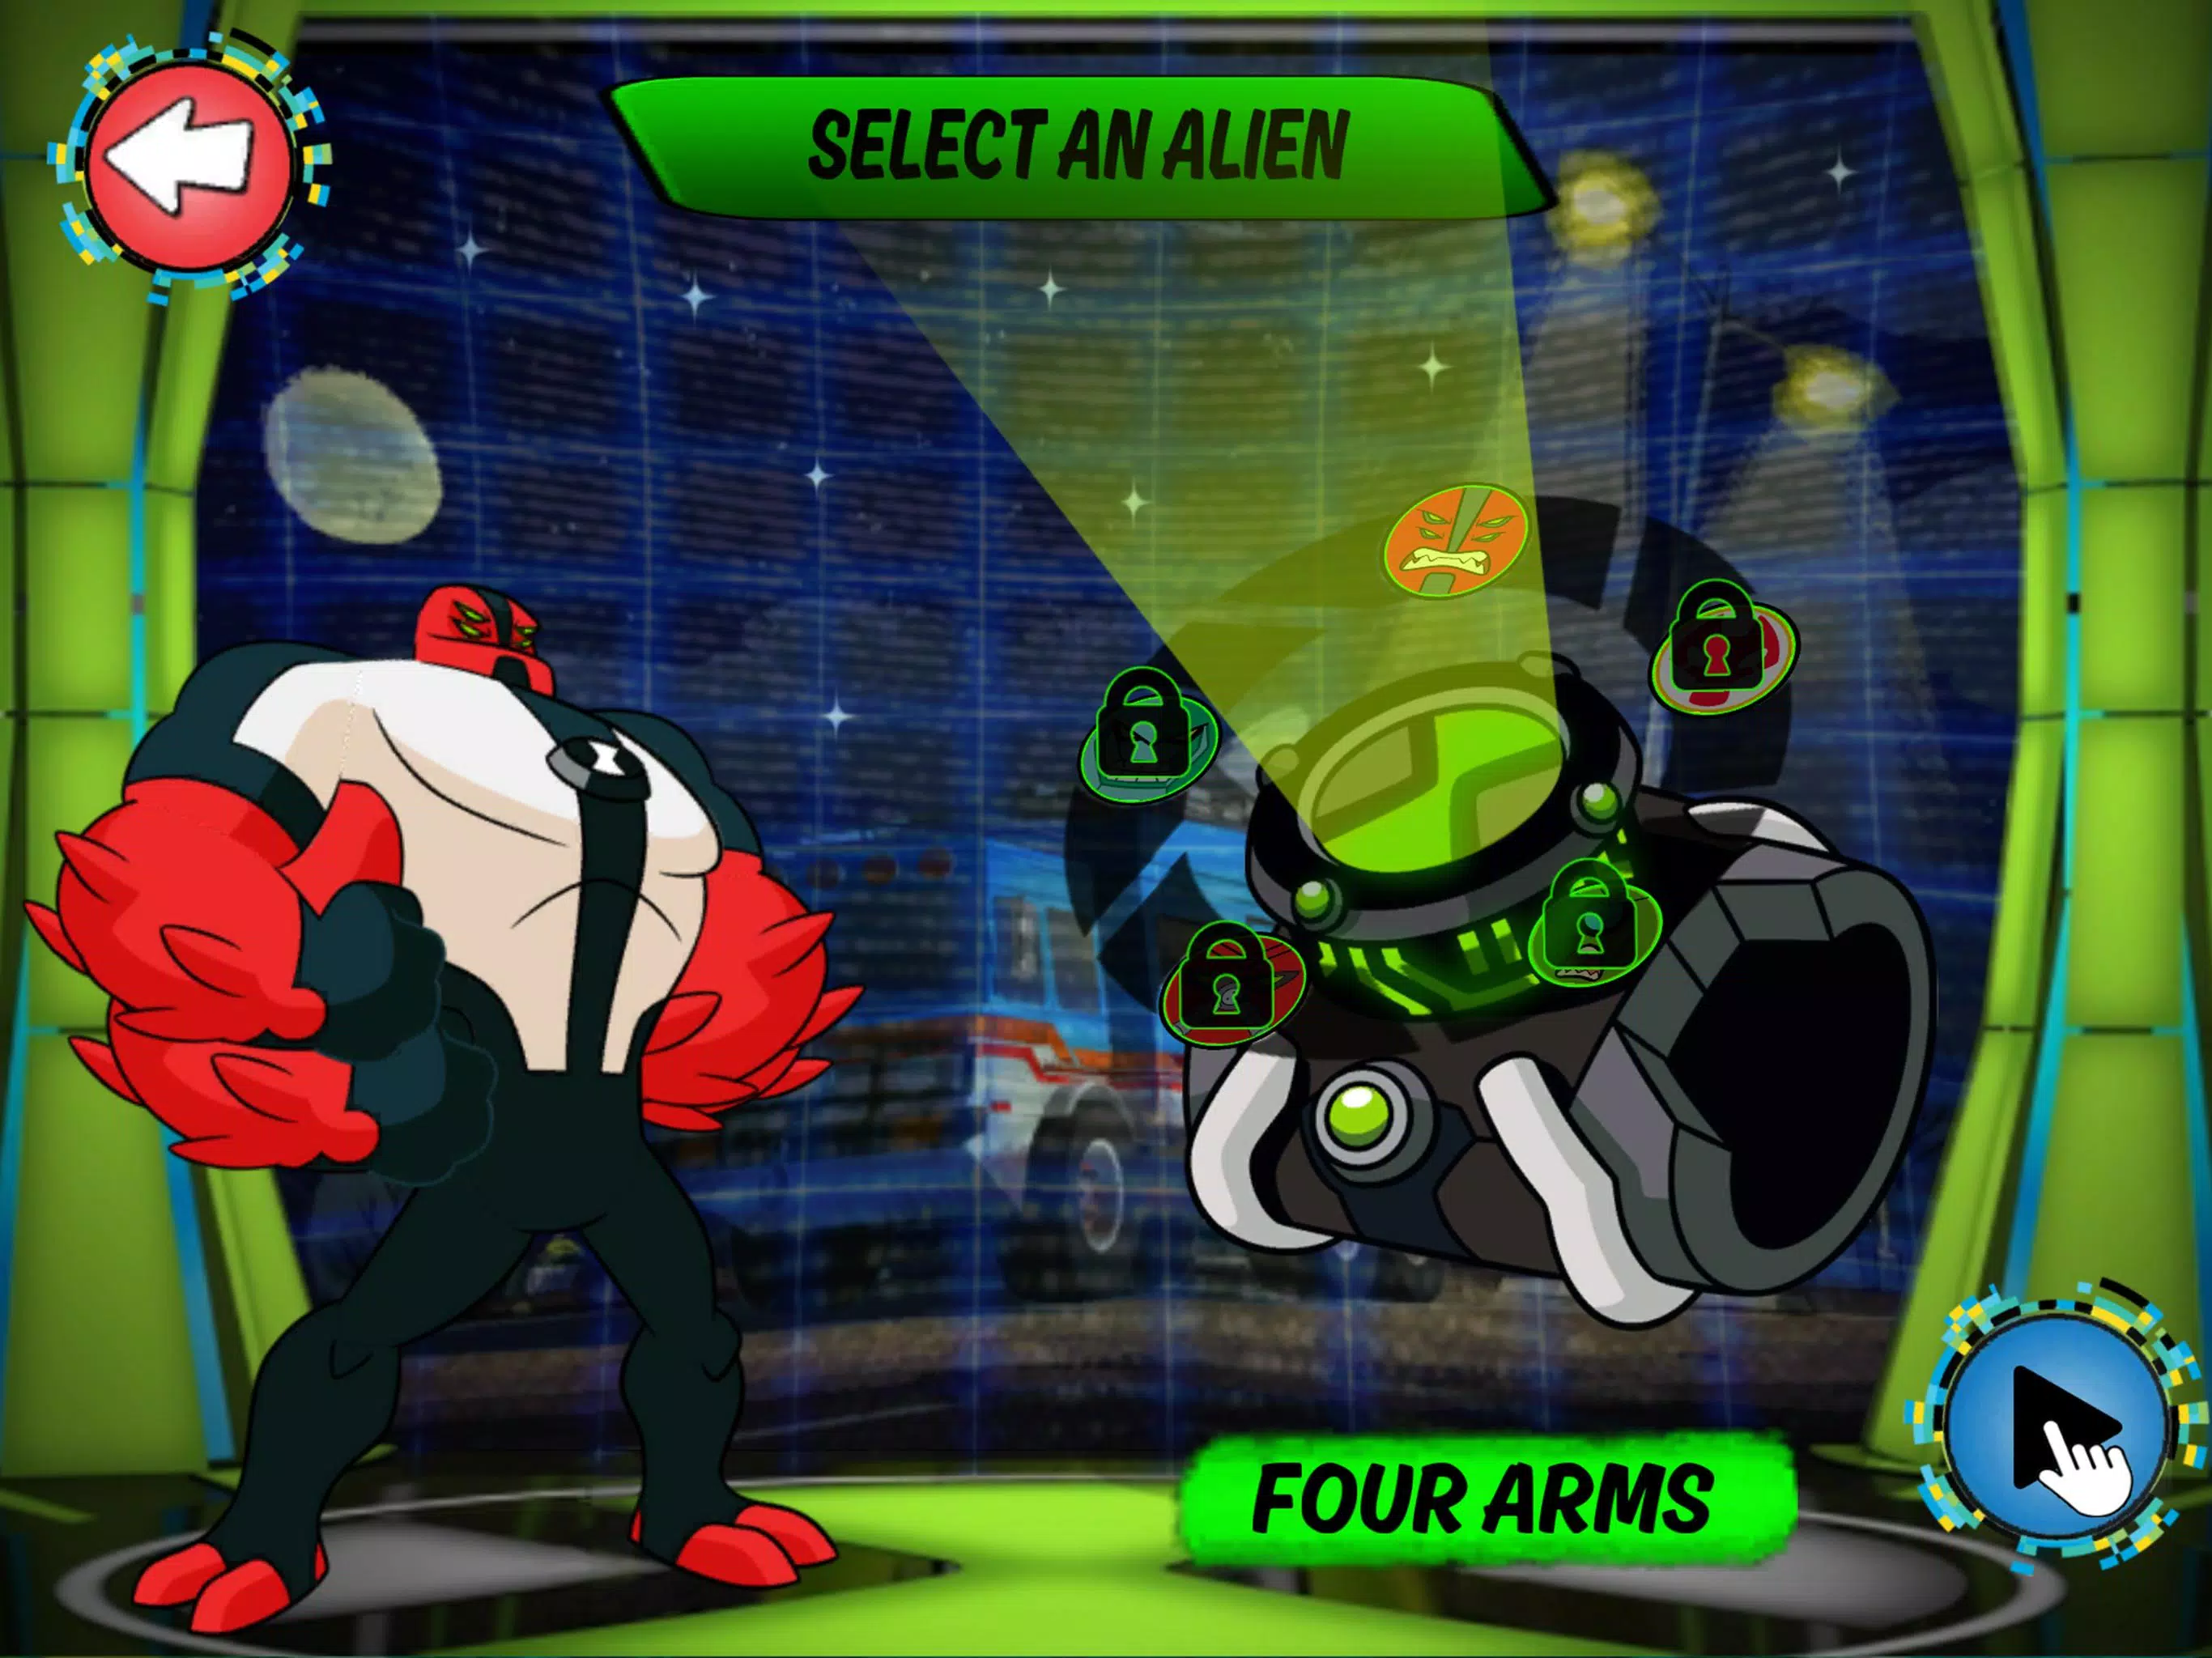 Ben 10: Family Genius for Android - Download